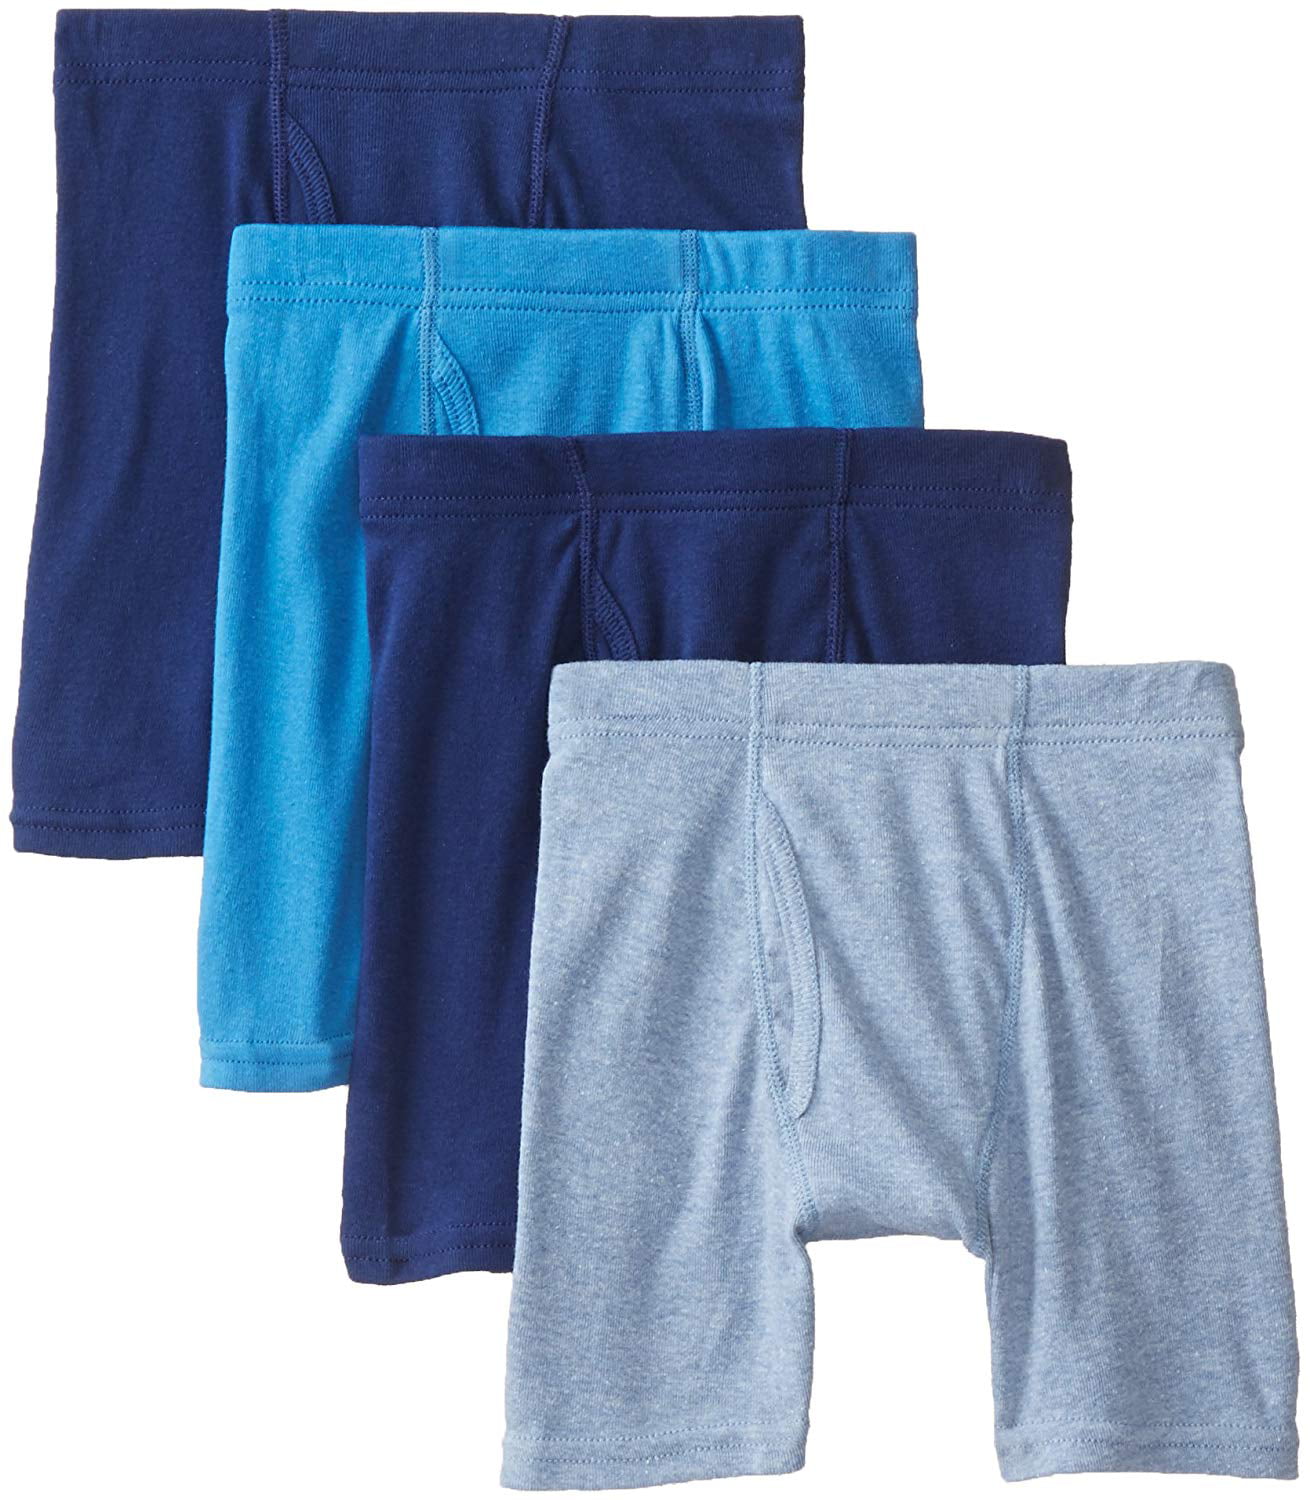 Hanes - Boys' 4 Pack Ultimate Comfortsoft Blue Dyed Boxer Brief ...